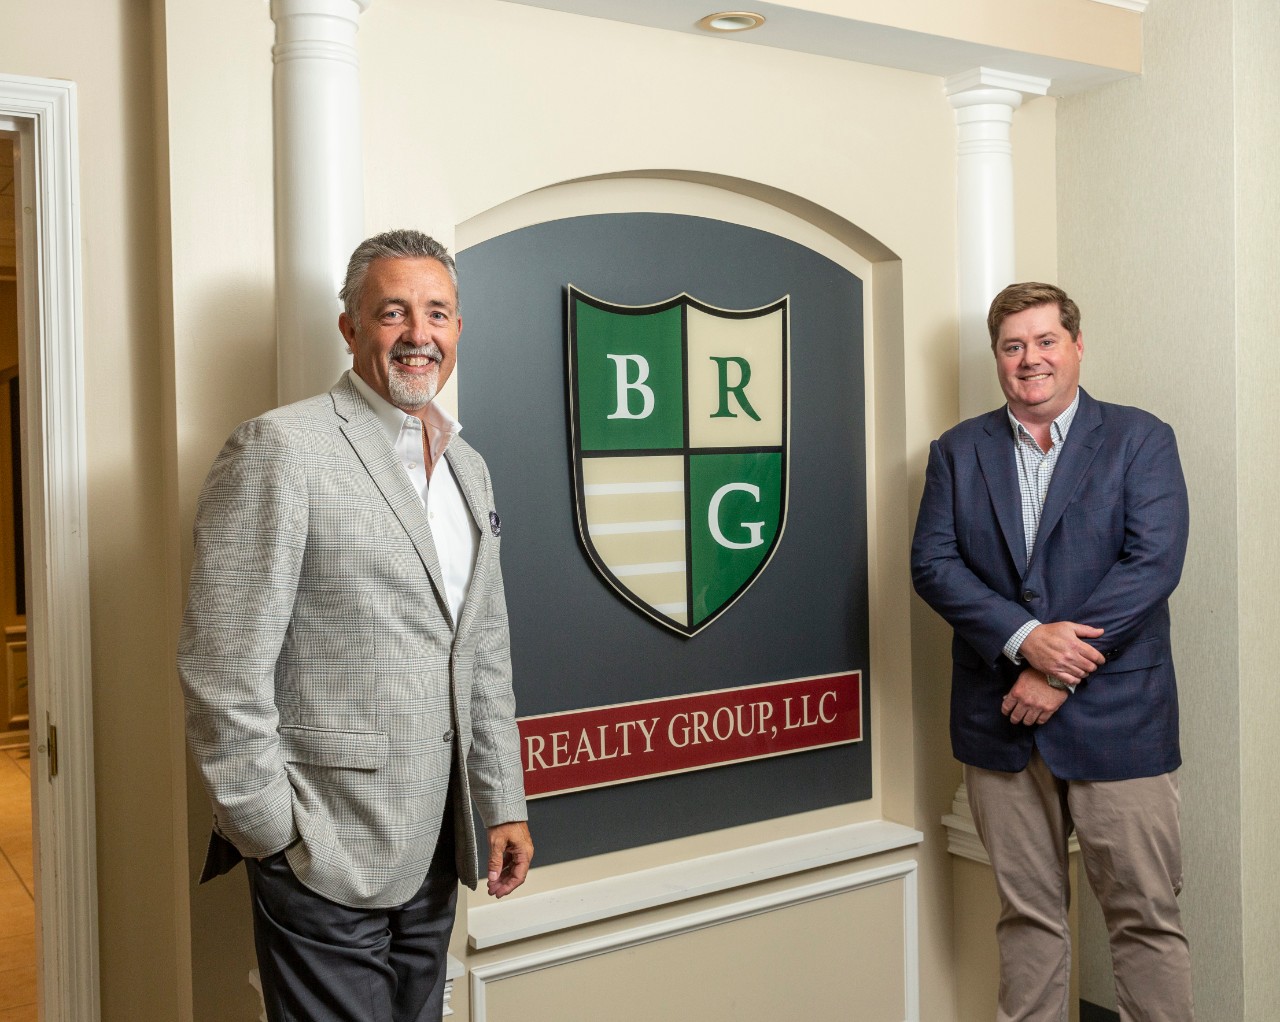 From left: Don Brunner (CEO) and Alex Parlin (CFO) of BRG Realty Group, LLC